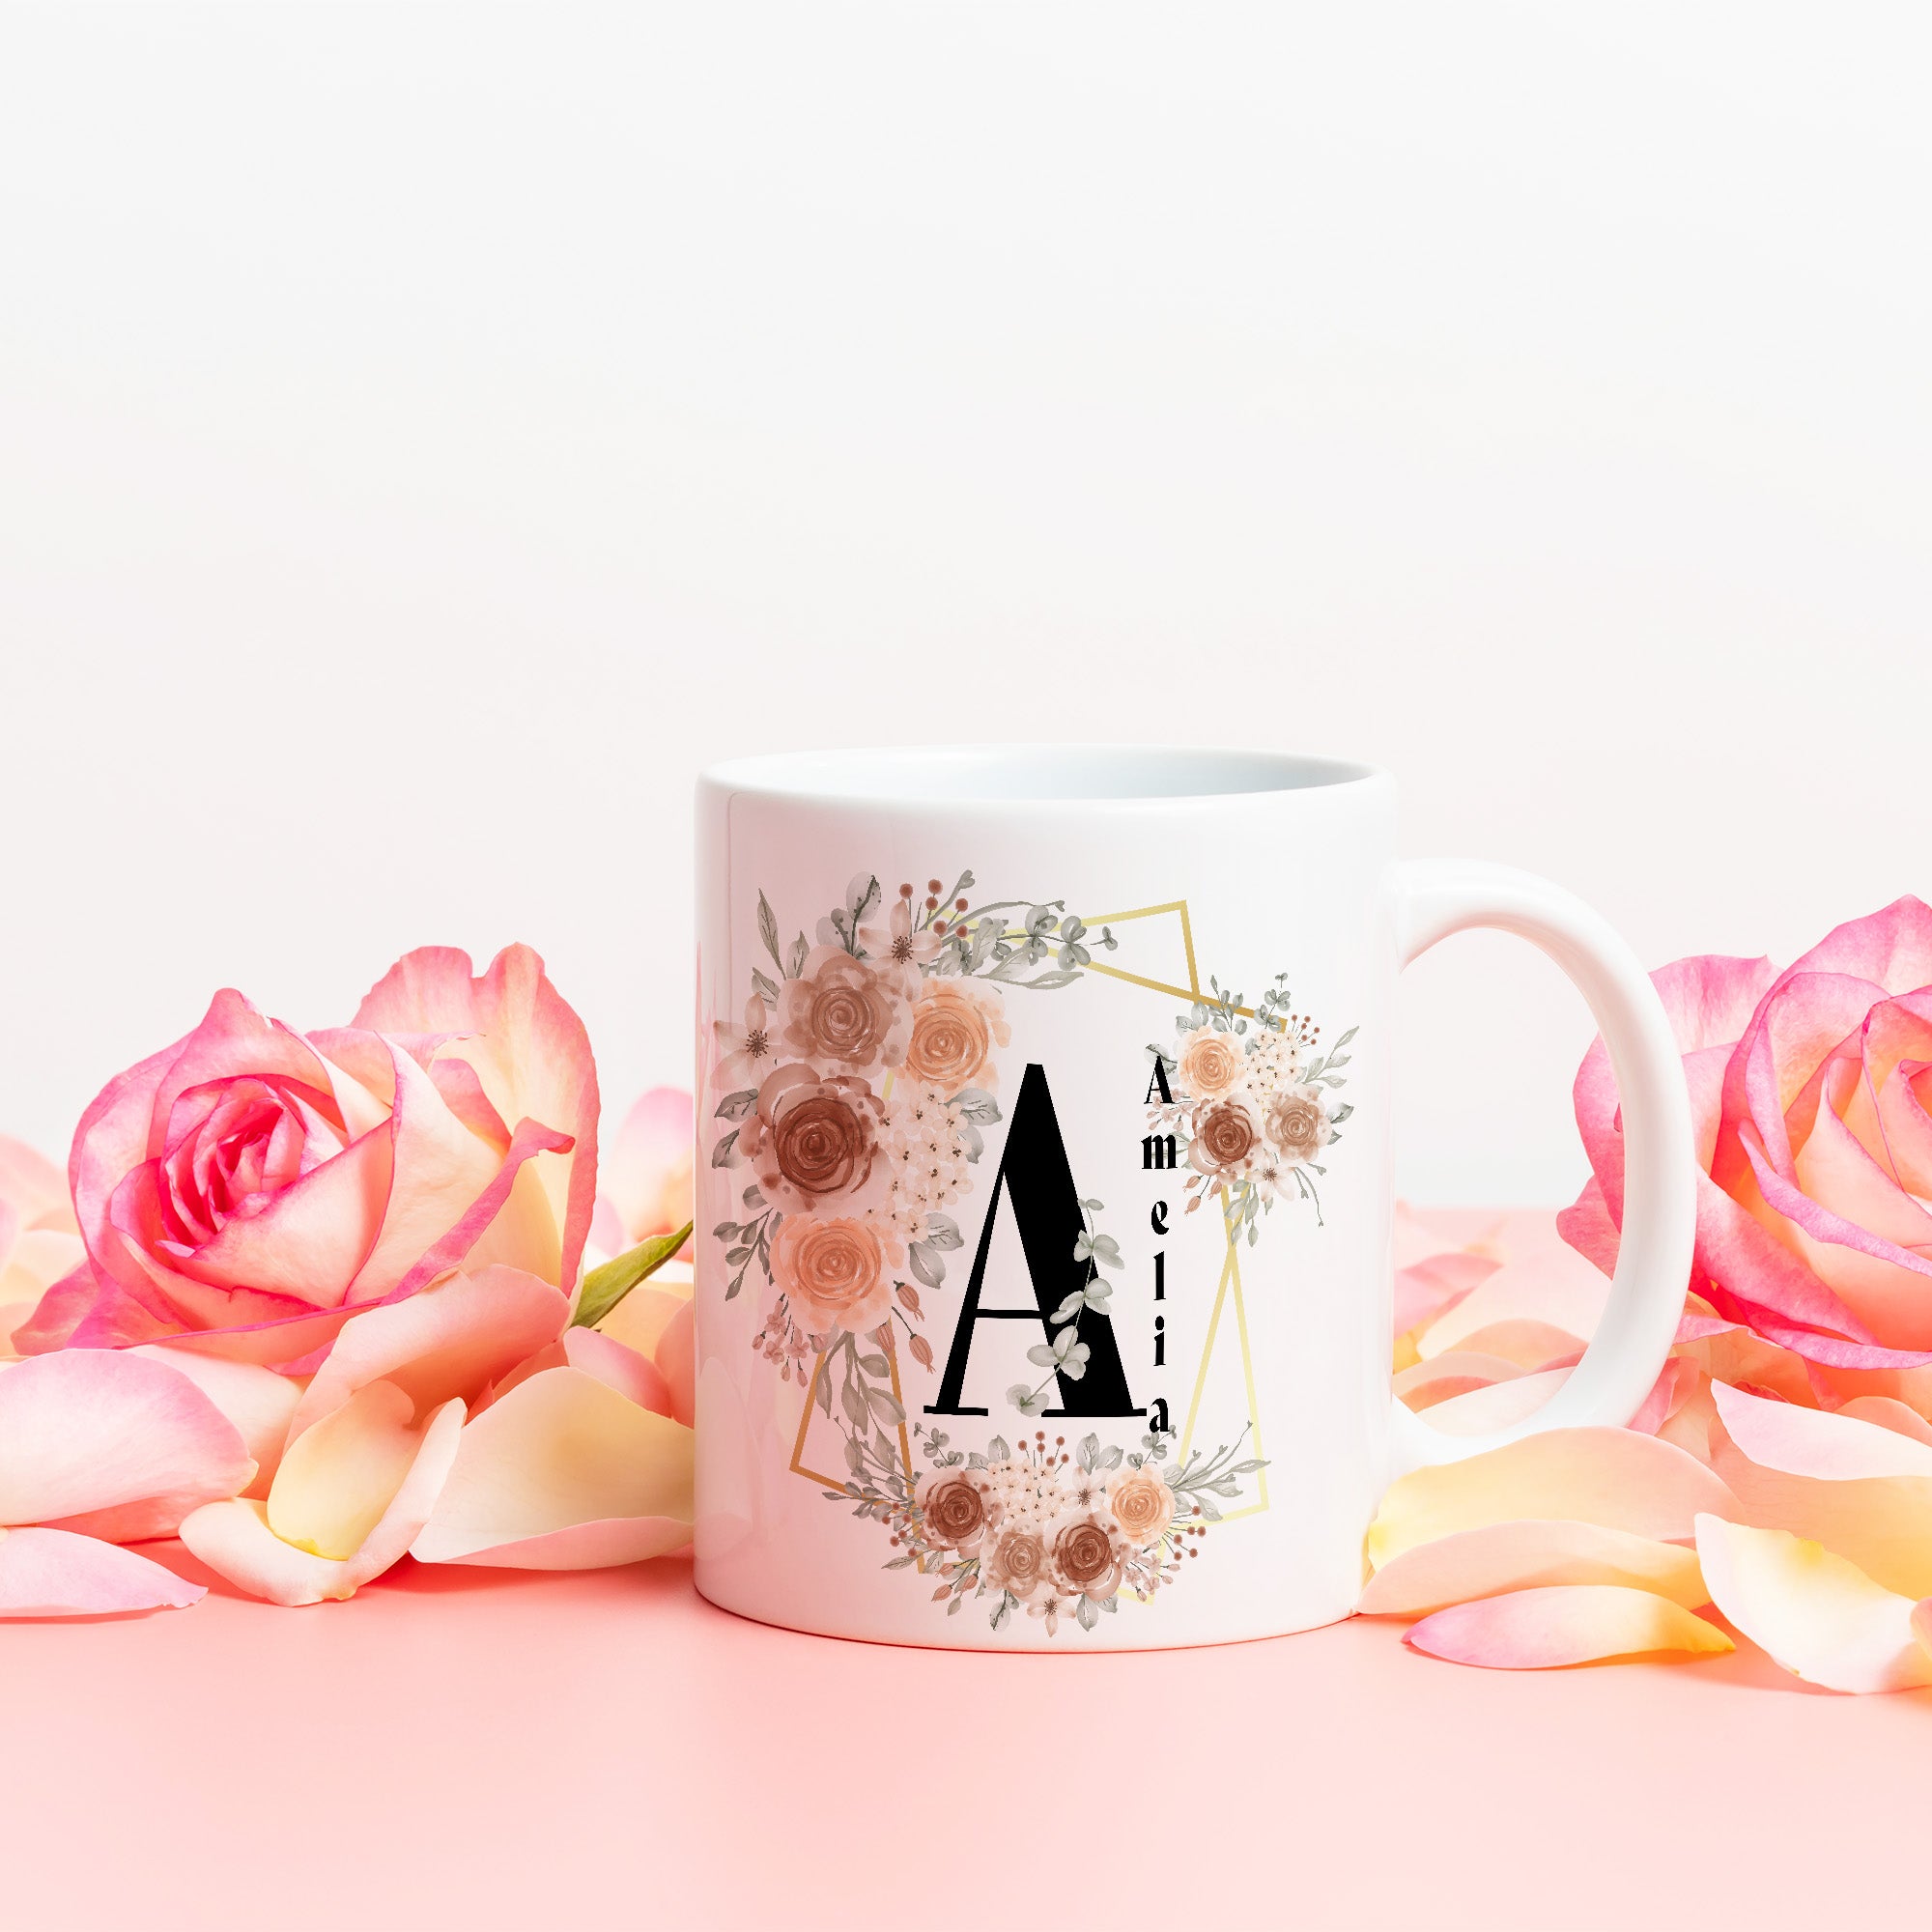 Shop Personalized Custom Initial Letter & Name Monogram Watercolor Floral Design Coffee Mug Cup, Mugs, USA Boutique